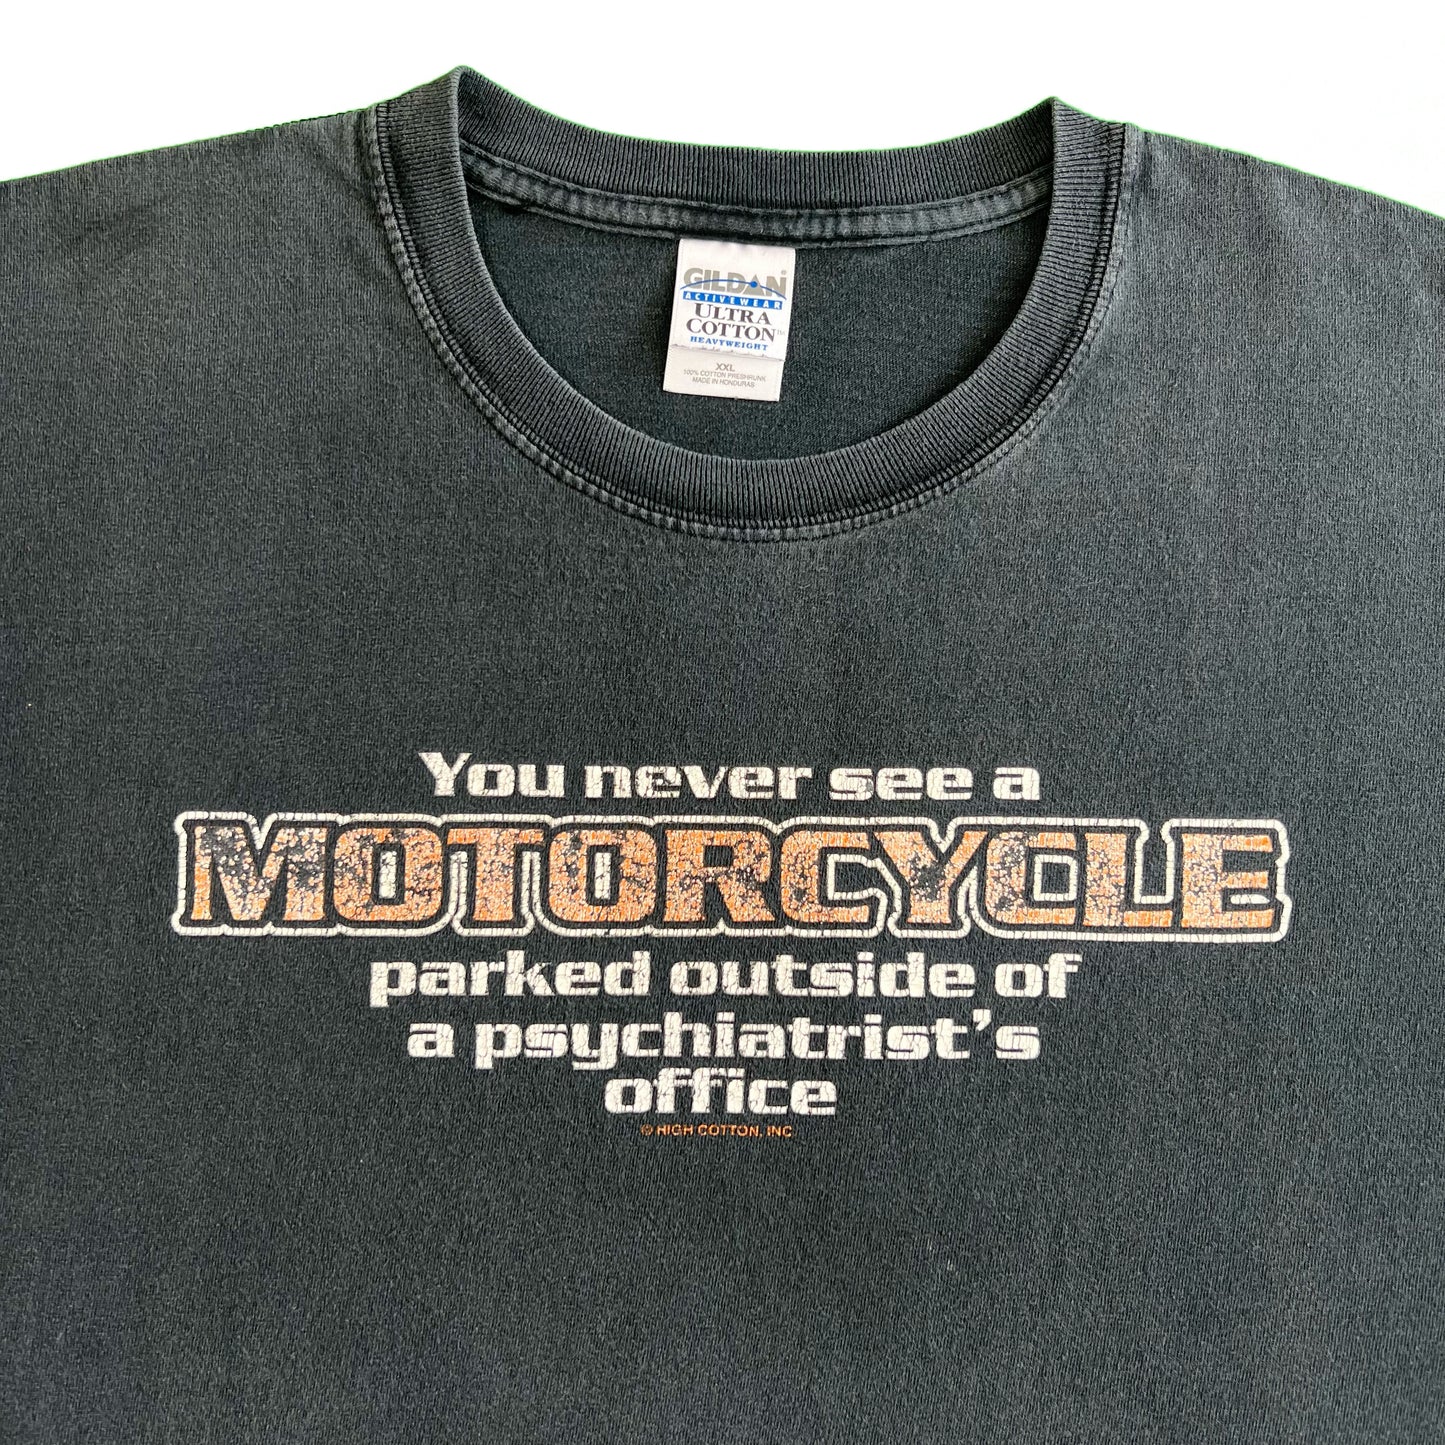 00s Biker in Therapy? Tee- XL